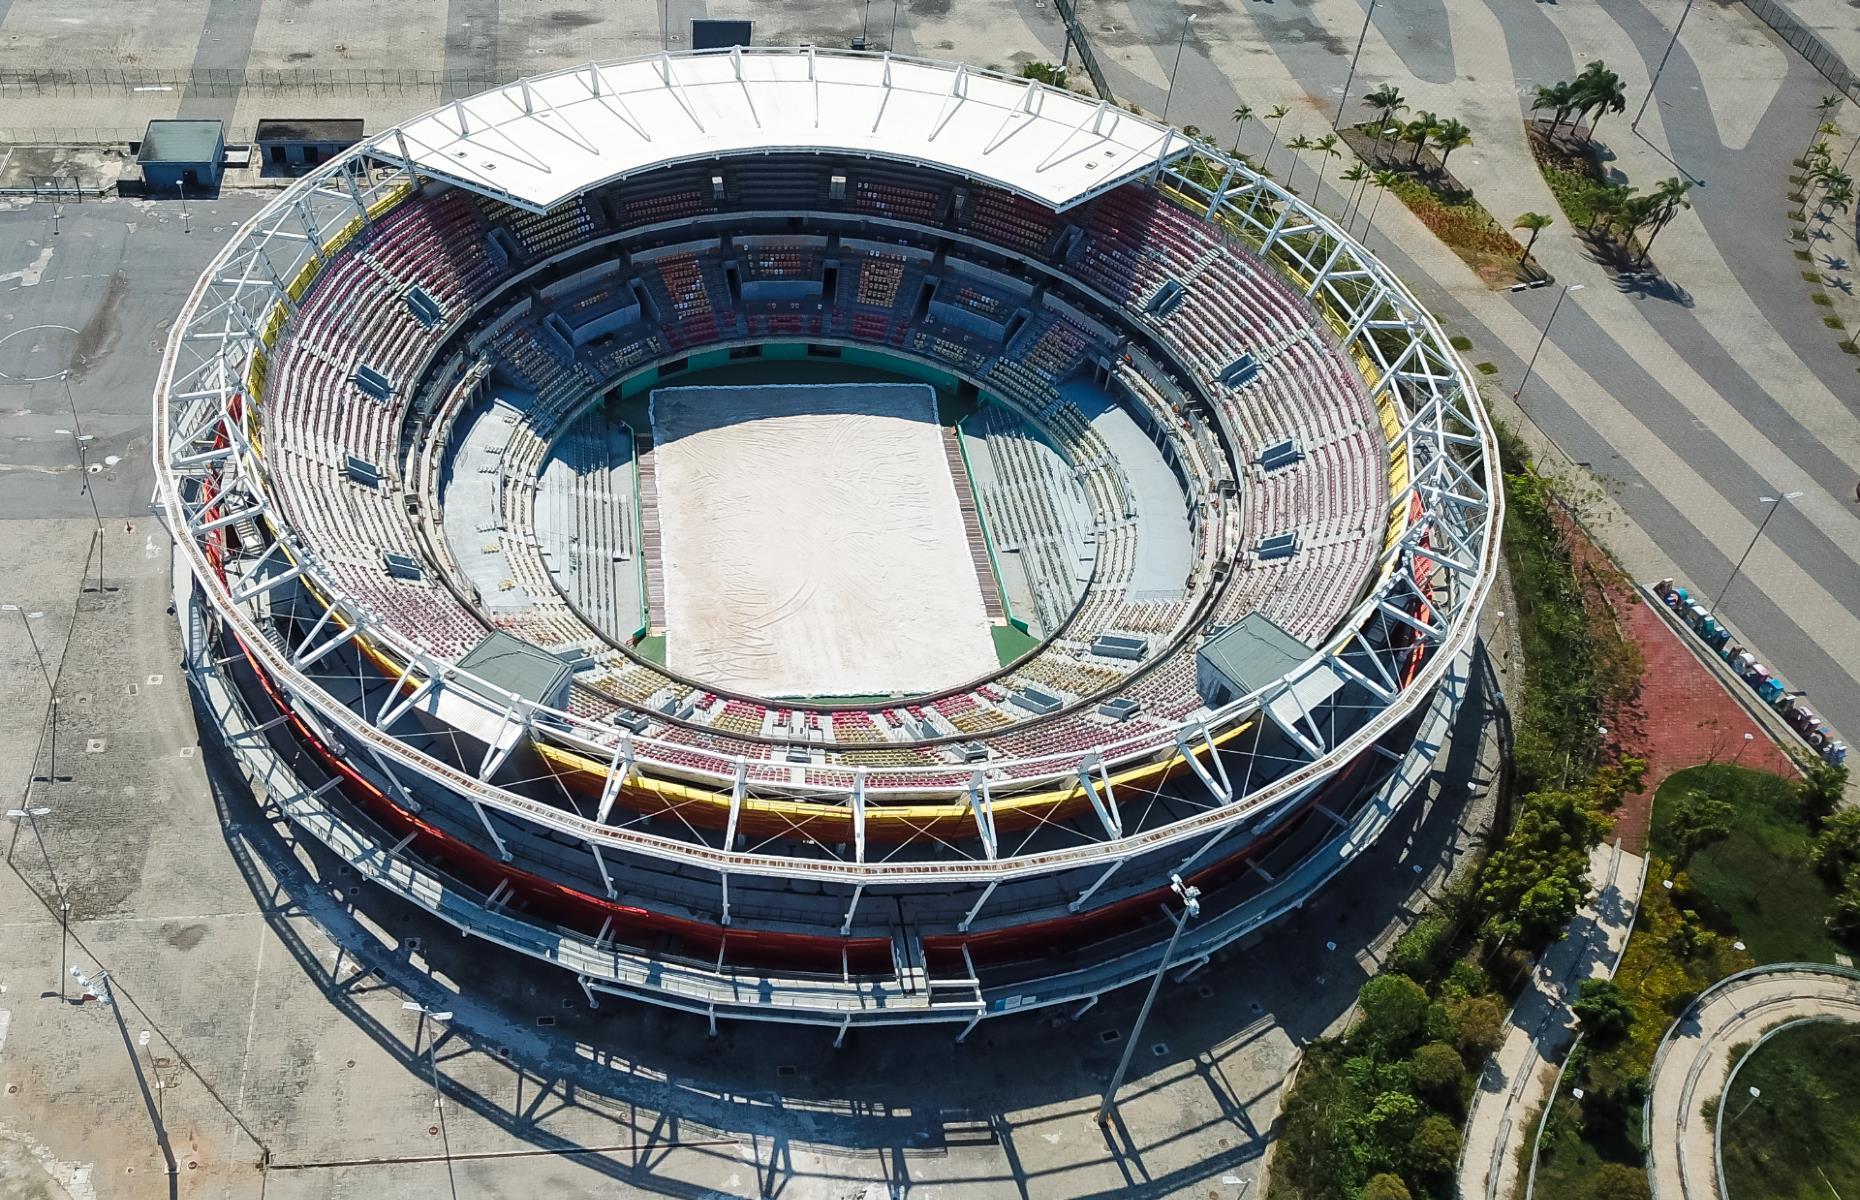 Montreal's Olympic Stadium to get new roof for $250 million – The